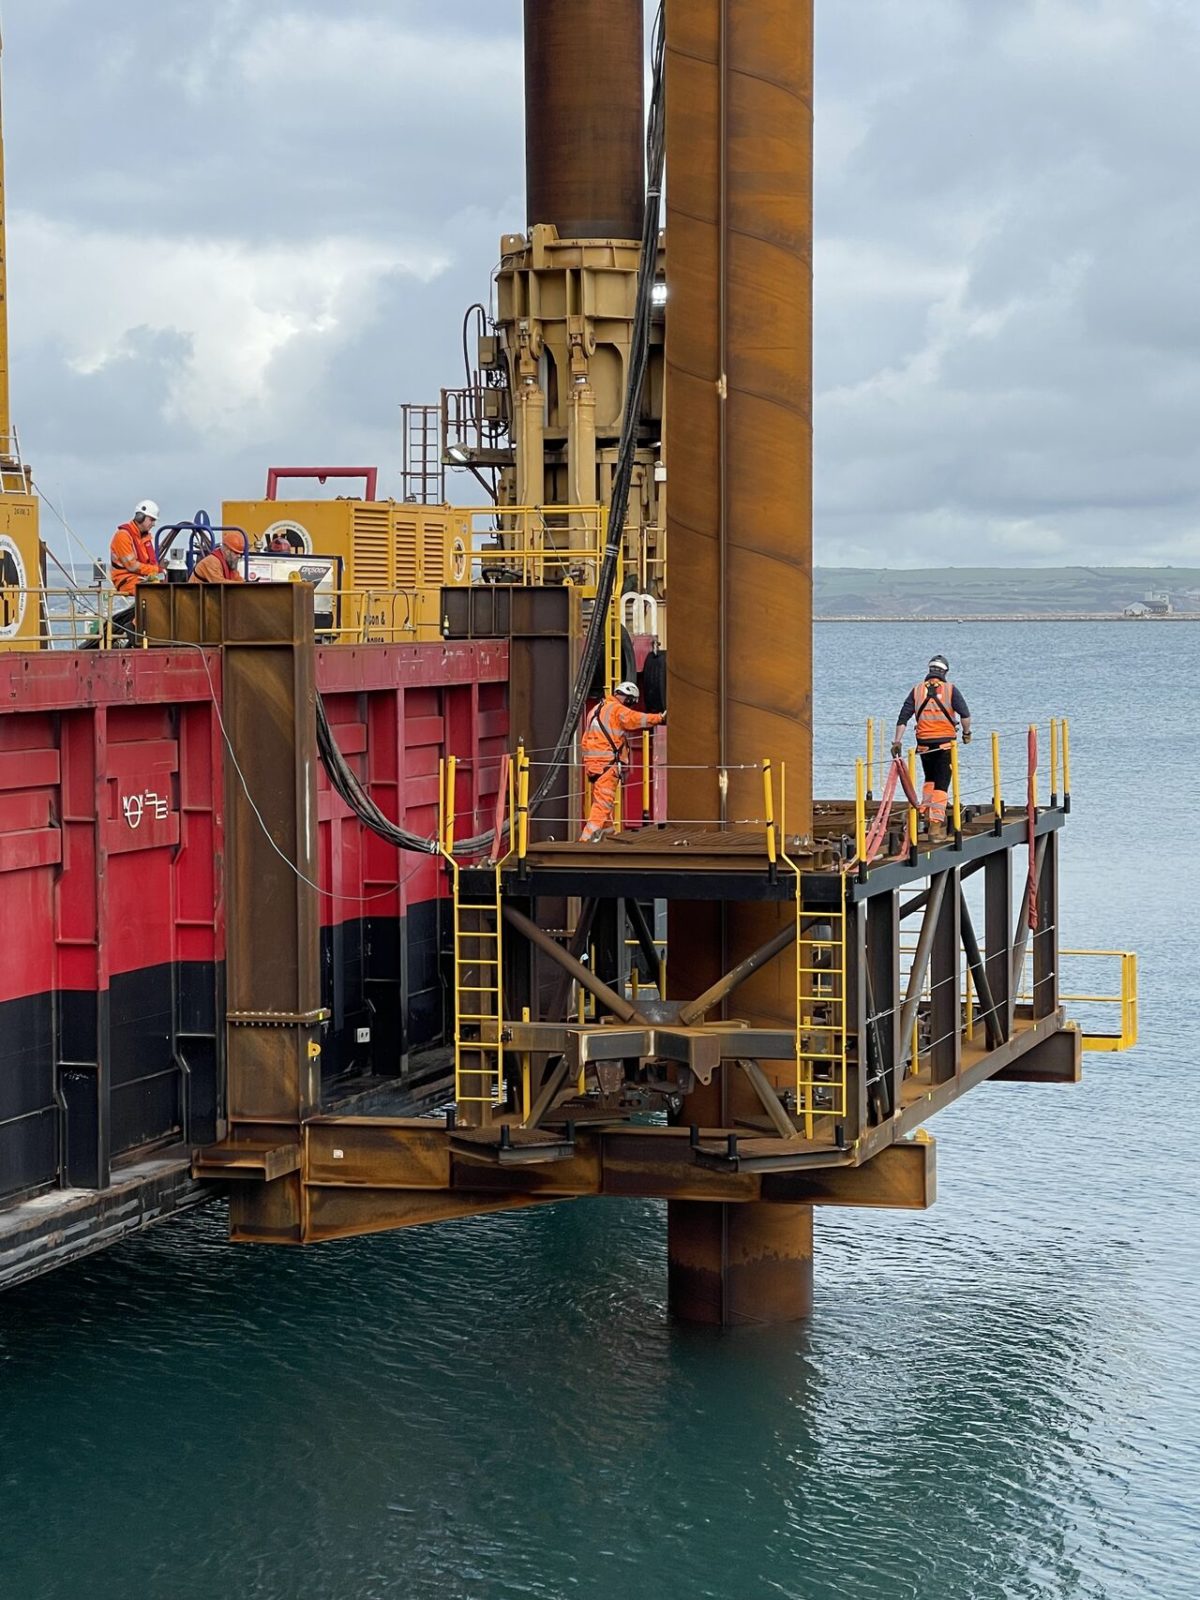 RED7MARINE COMMENCES MARINE PILING IN PORTLAND